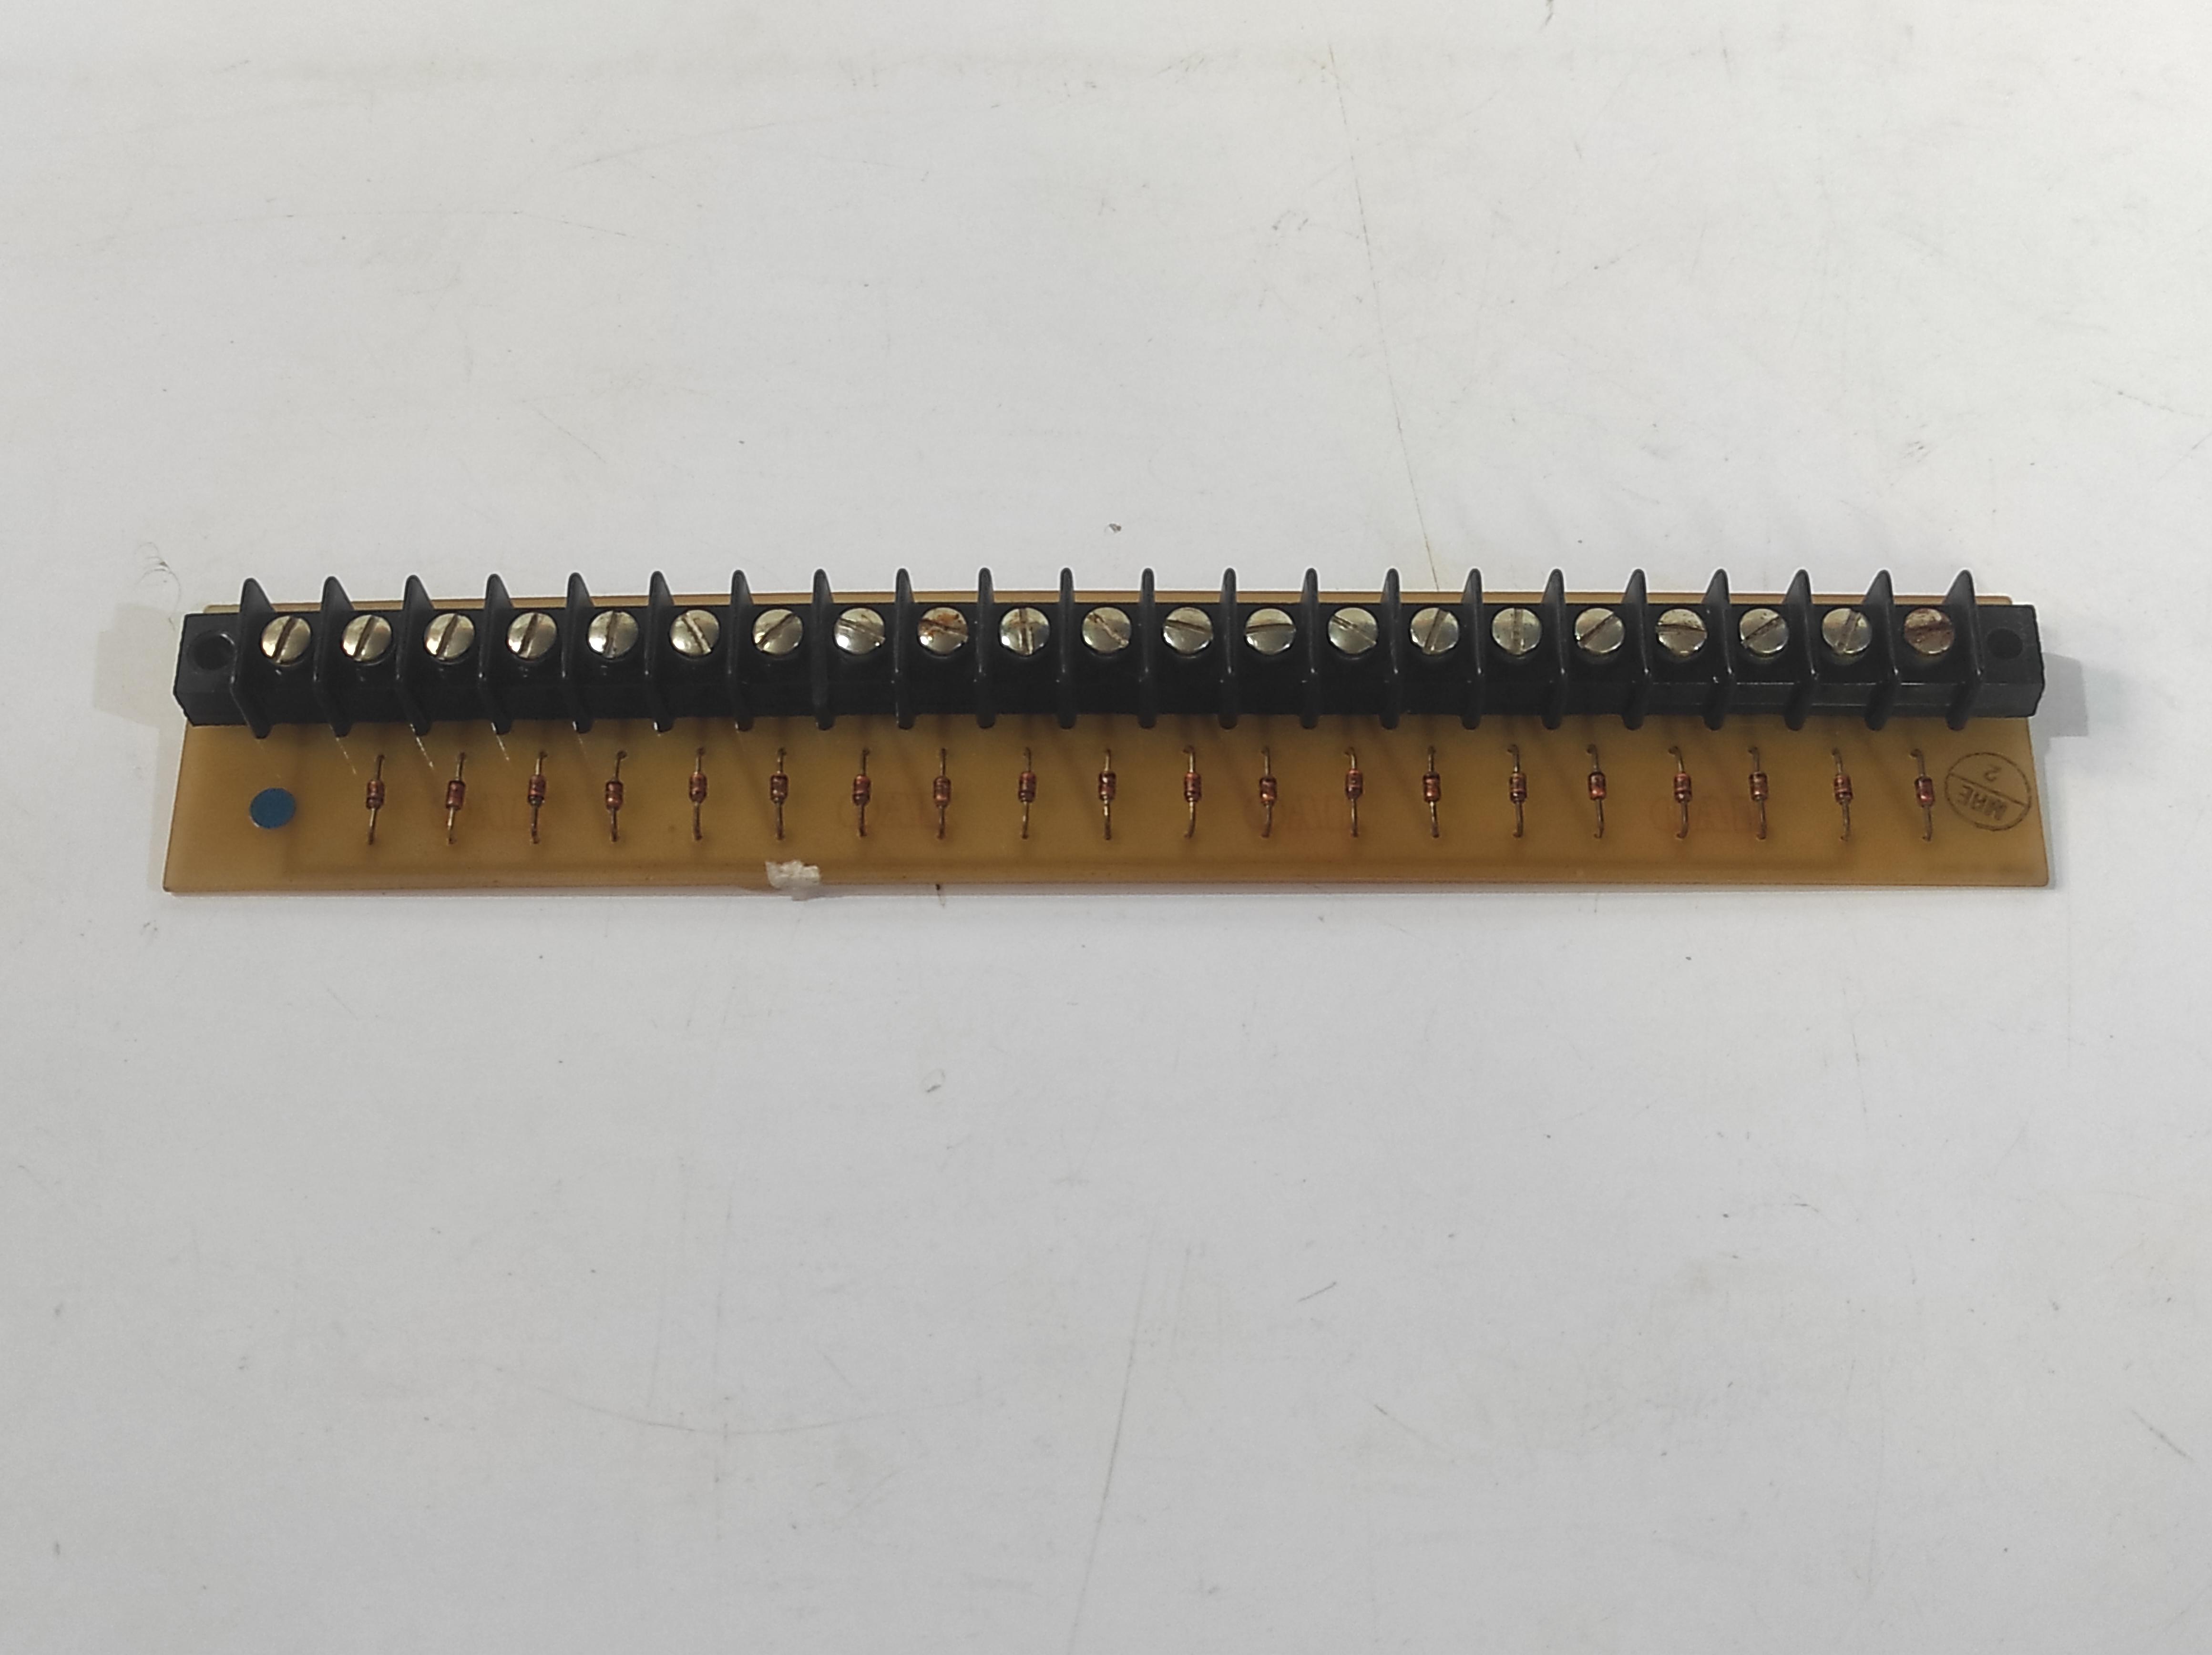 Cameron 381128-03-02 Lamp Test Diode Assembly PCB 3811280302